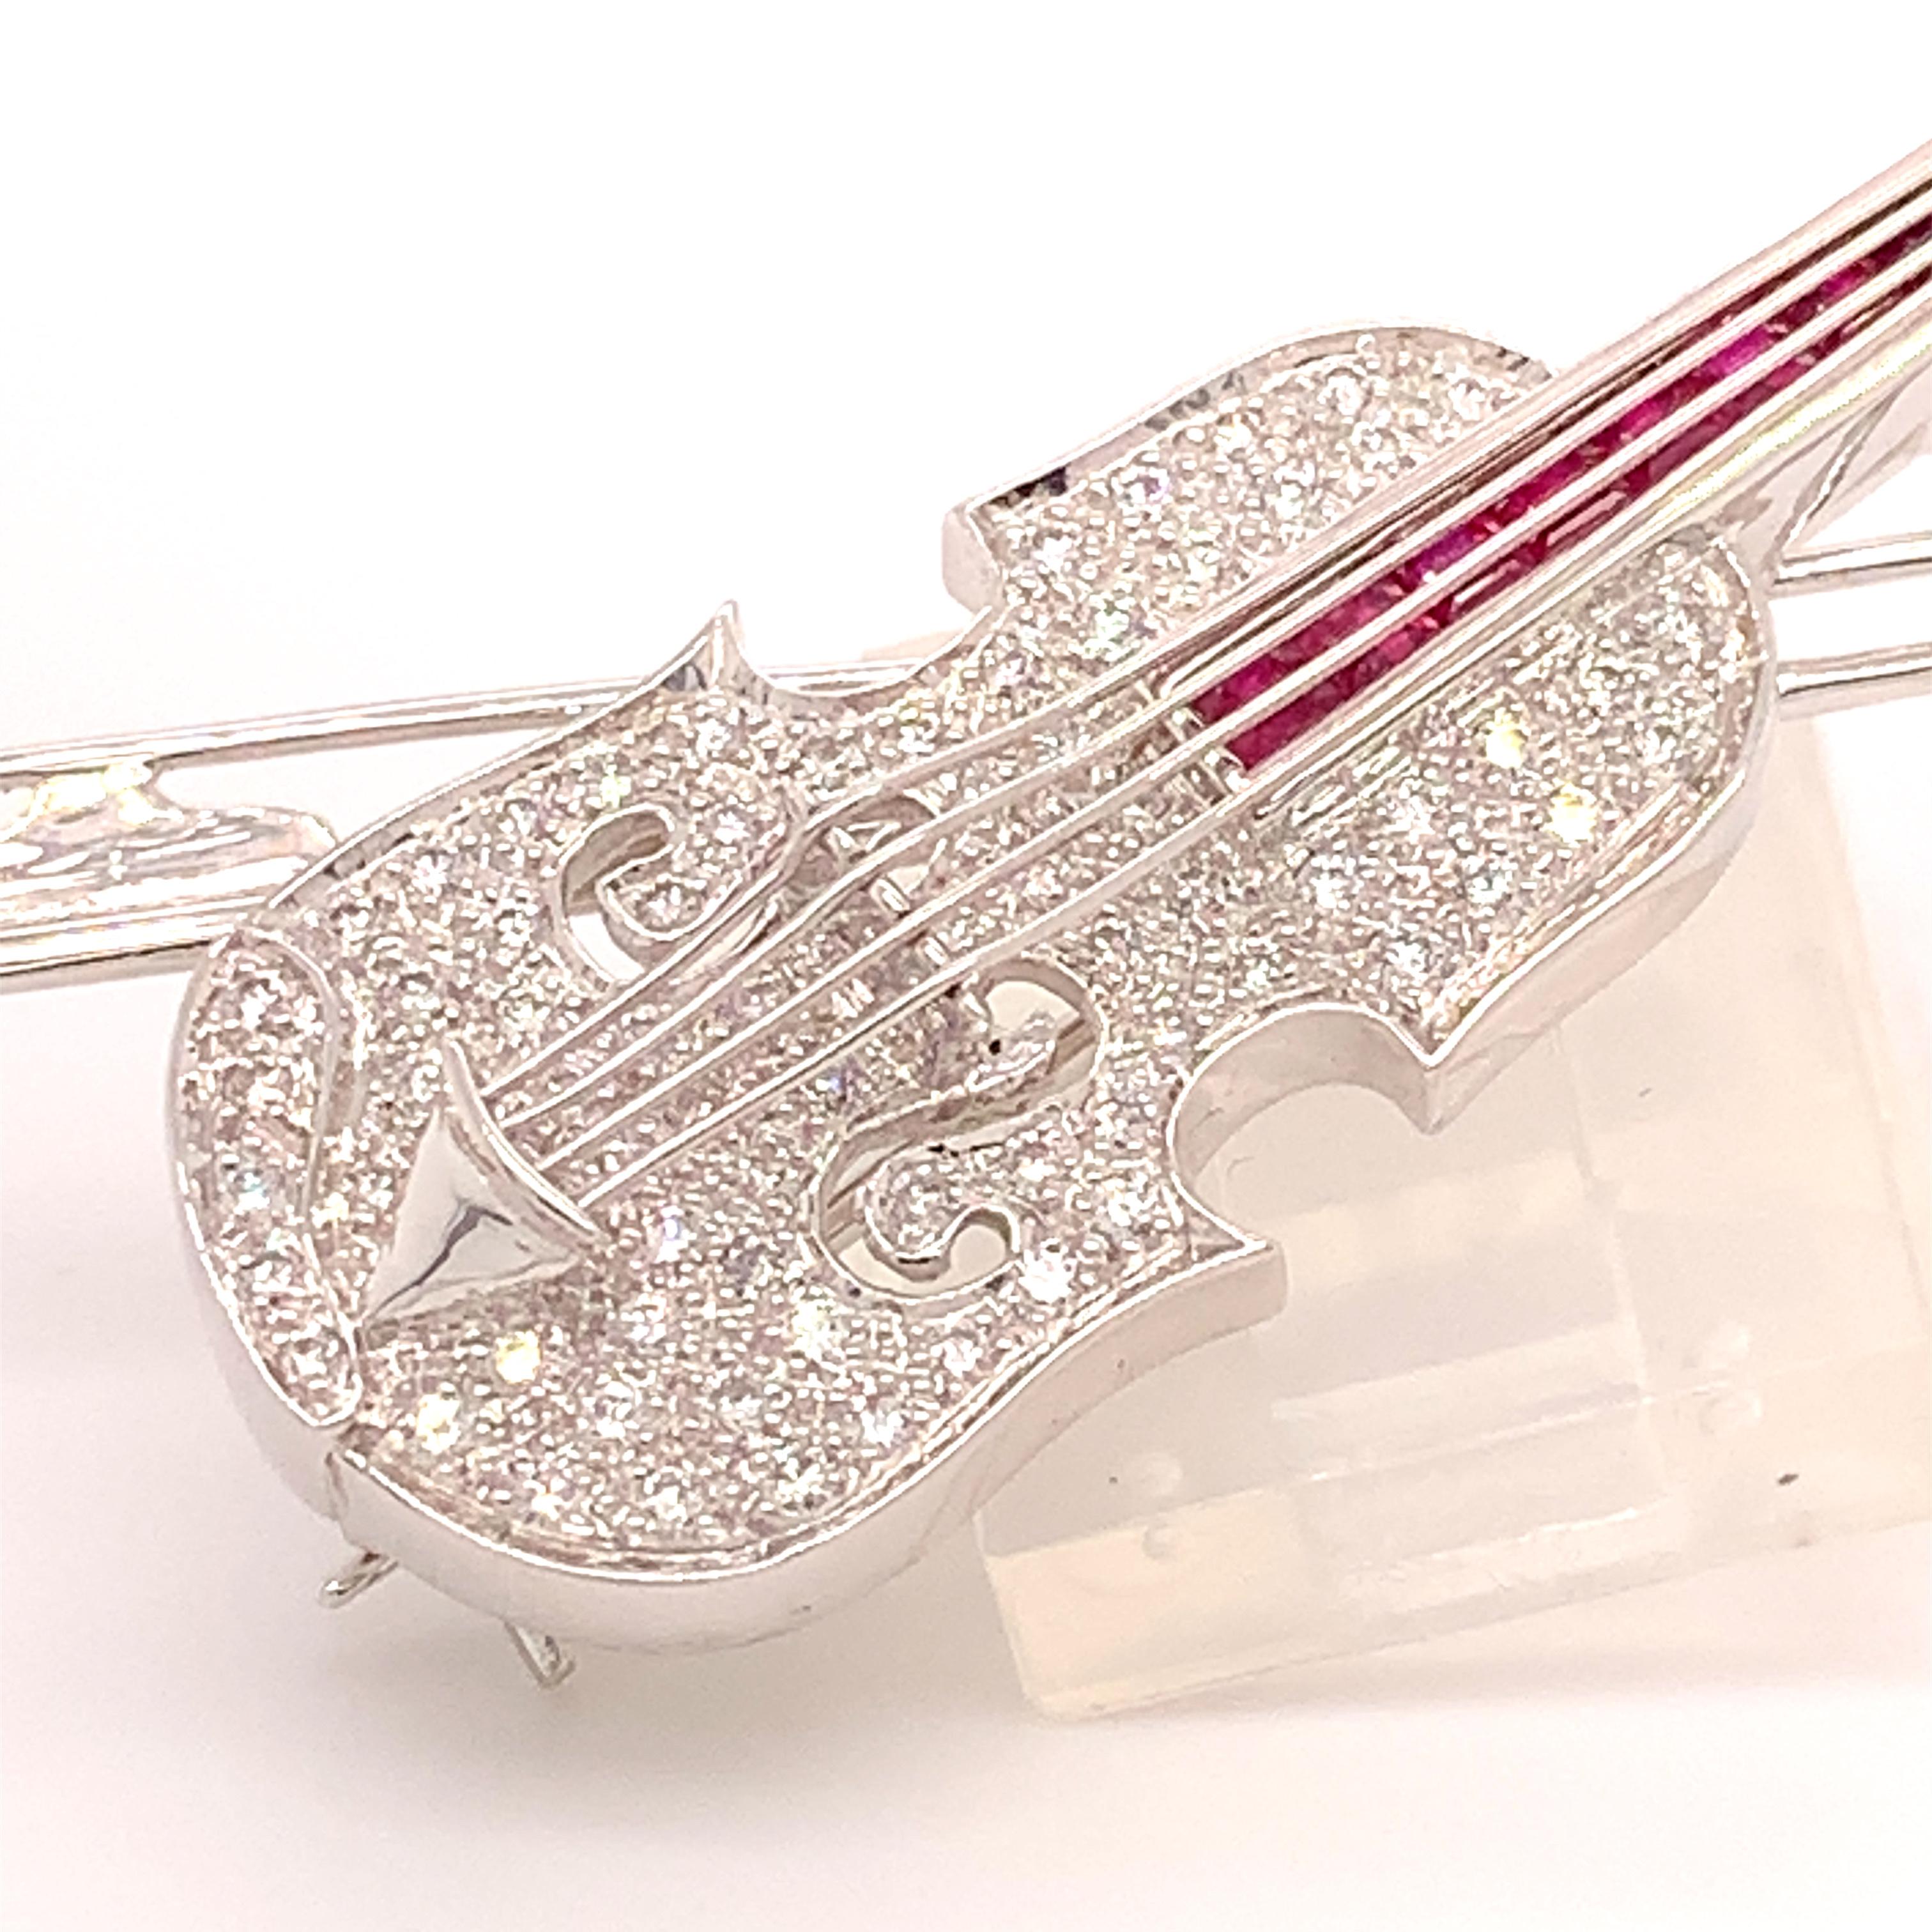 18k White Gold Genuine Natural Diamond and Ruby Violin Viola Brooch Pin (#J4846)

18k white gold violin/viola pin with over 1/2 carat total weight in pave set diamonds and almost 3/4 carat total weight in genuine rubies (in the neck under the